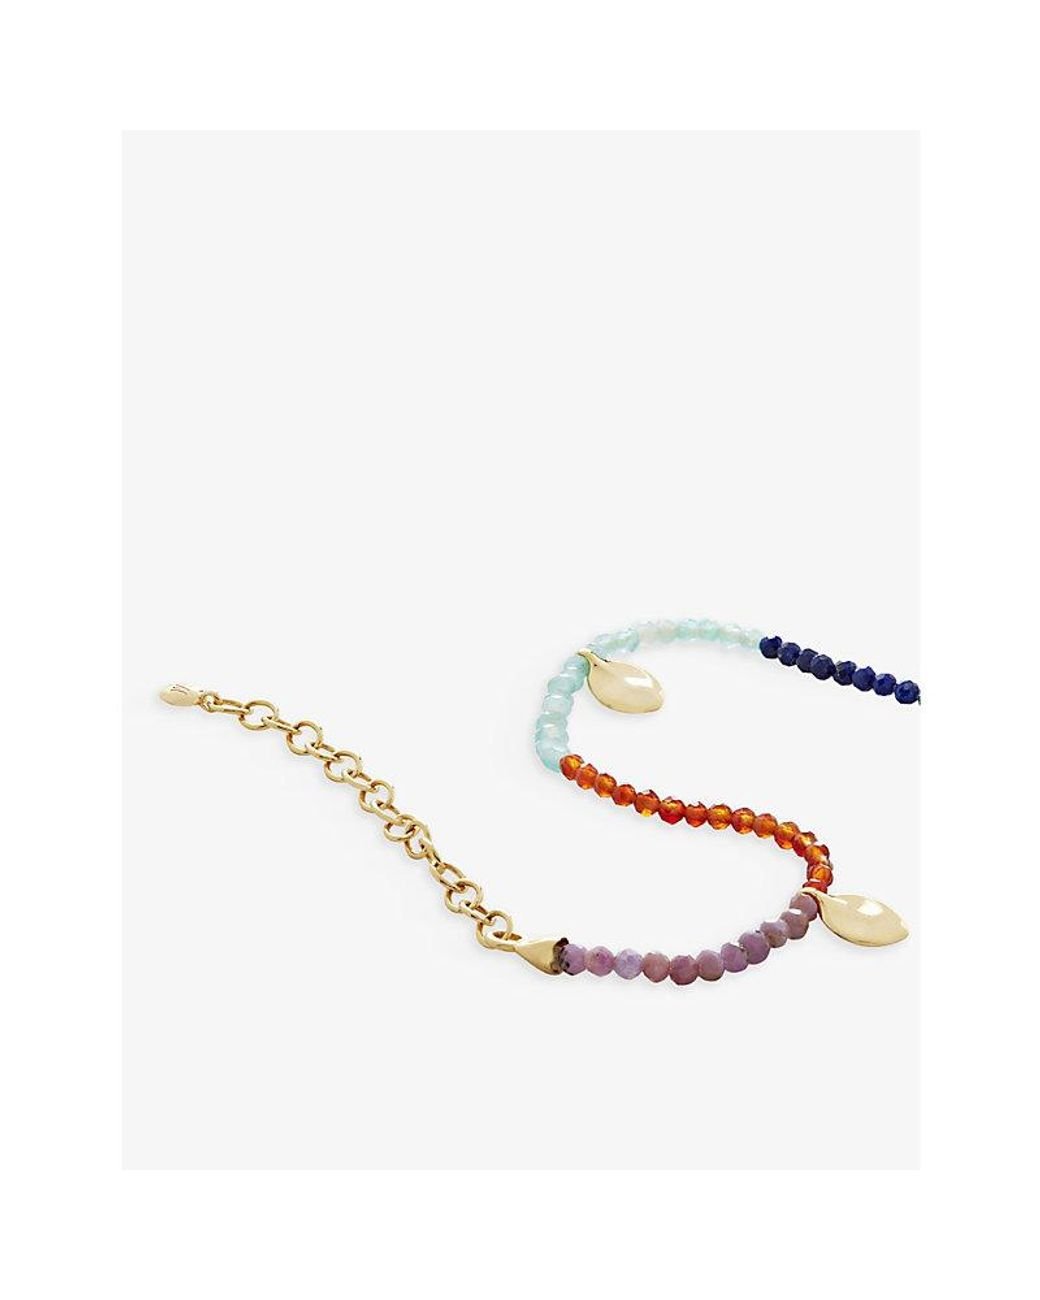 Monica Vinader Triple Beaded Chain Necklace, Gold at John Lewis & Partners